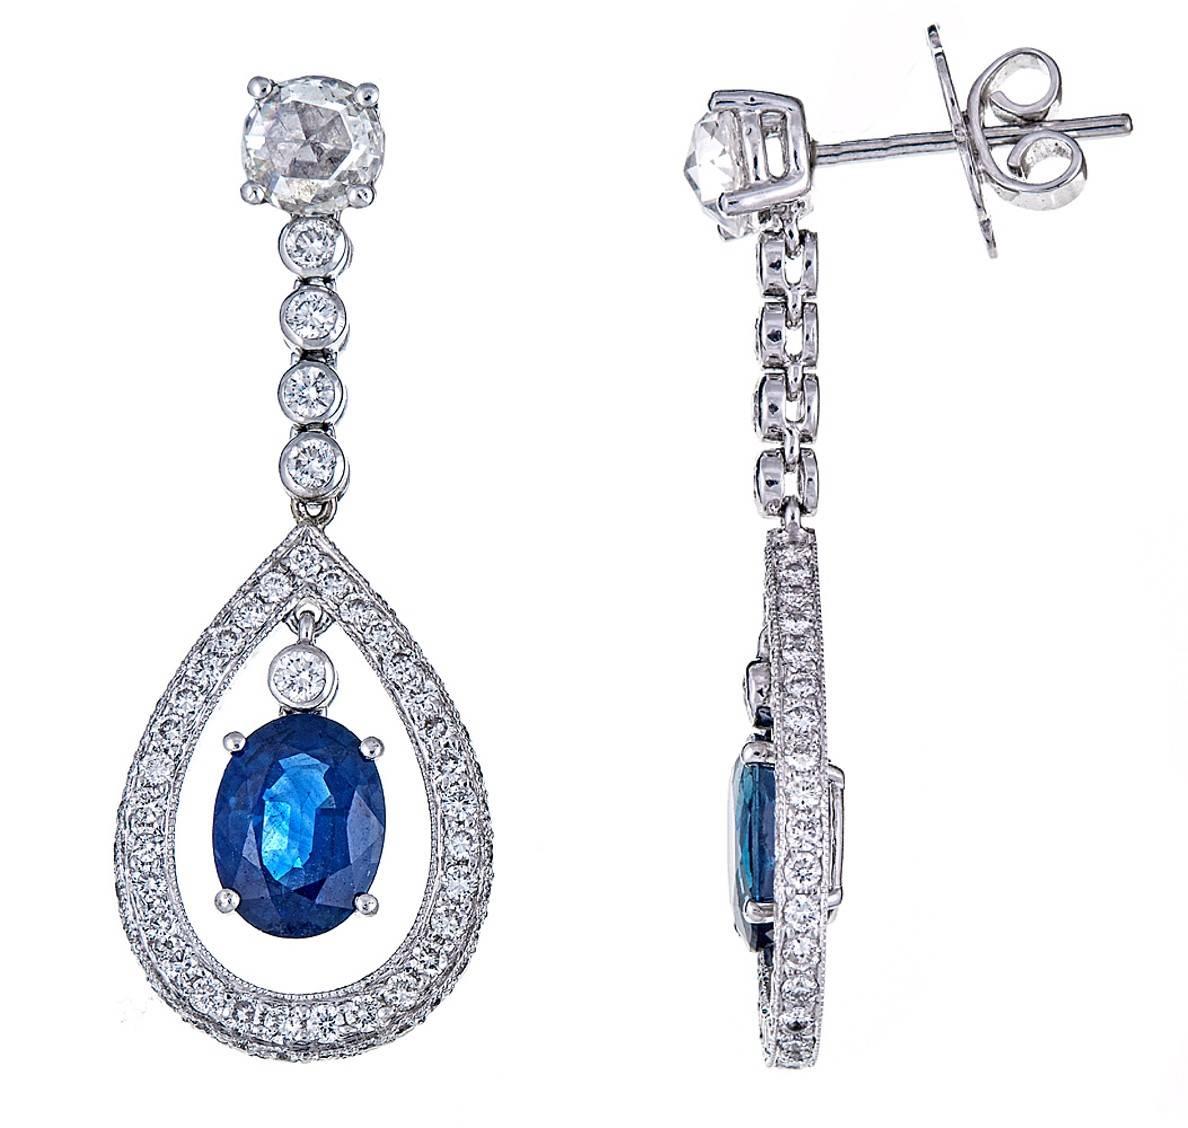 A breathtaking pair of 18K White Gold drop earrings. Two larger, round diamonds, cascade downward into pave diamond enhanced drops for a combined weight of 2.28 carats. Within the center, 3.30 carats of bright, oval Blue Sapphires hang delicately. 